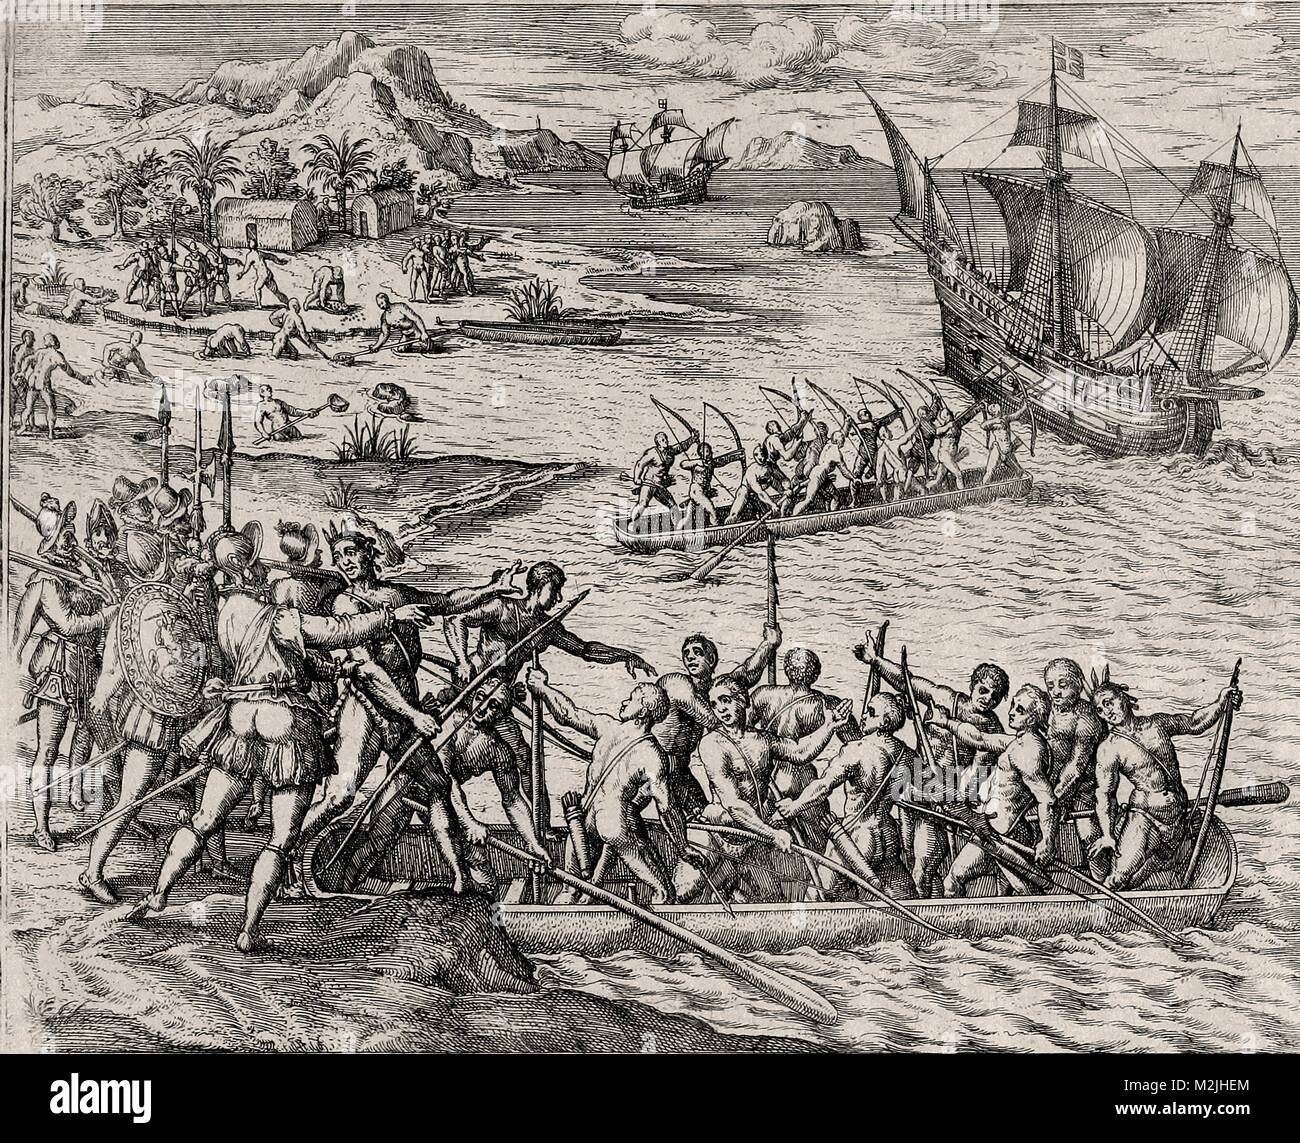 Theodor de Bry - Spanish Persuade the Natives of Cubagua to Defend the Island Against an Attacking French Vessel Stock Photo